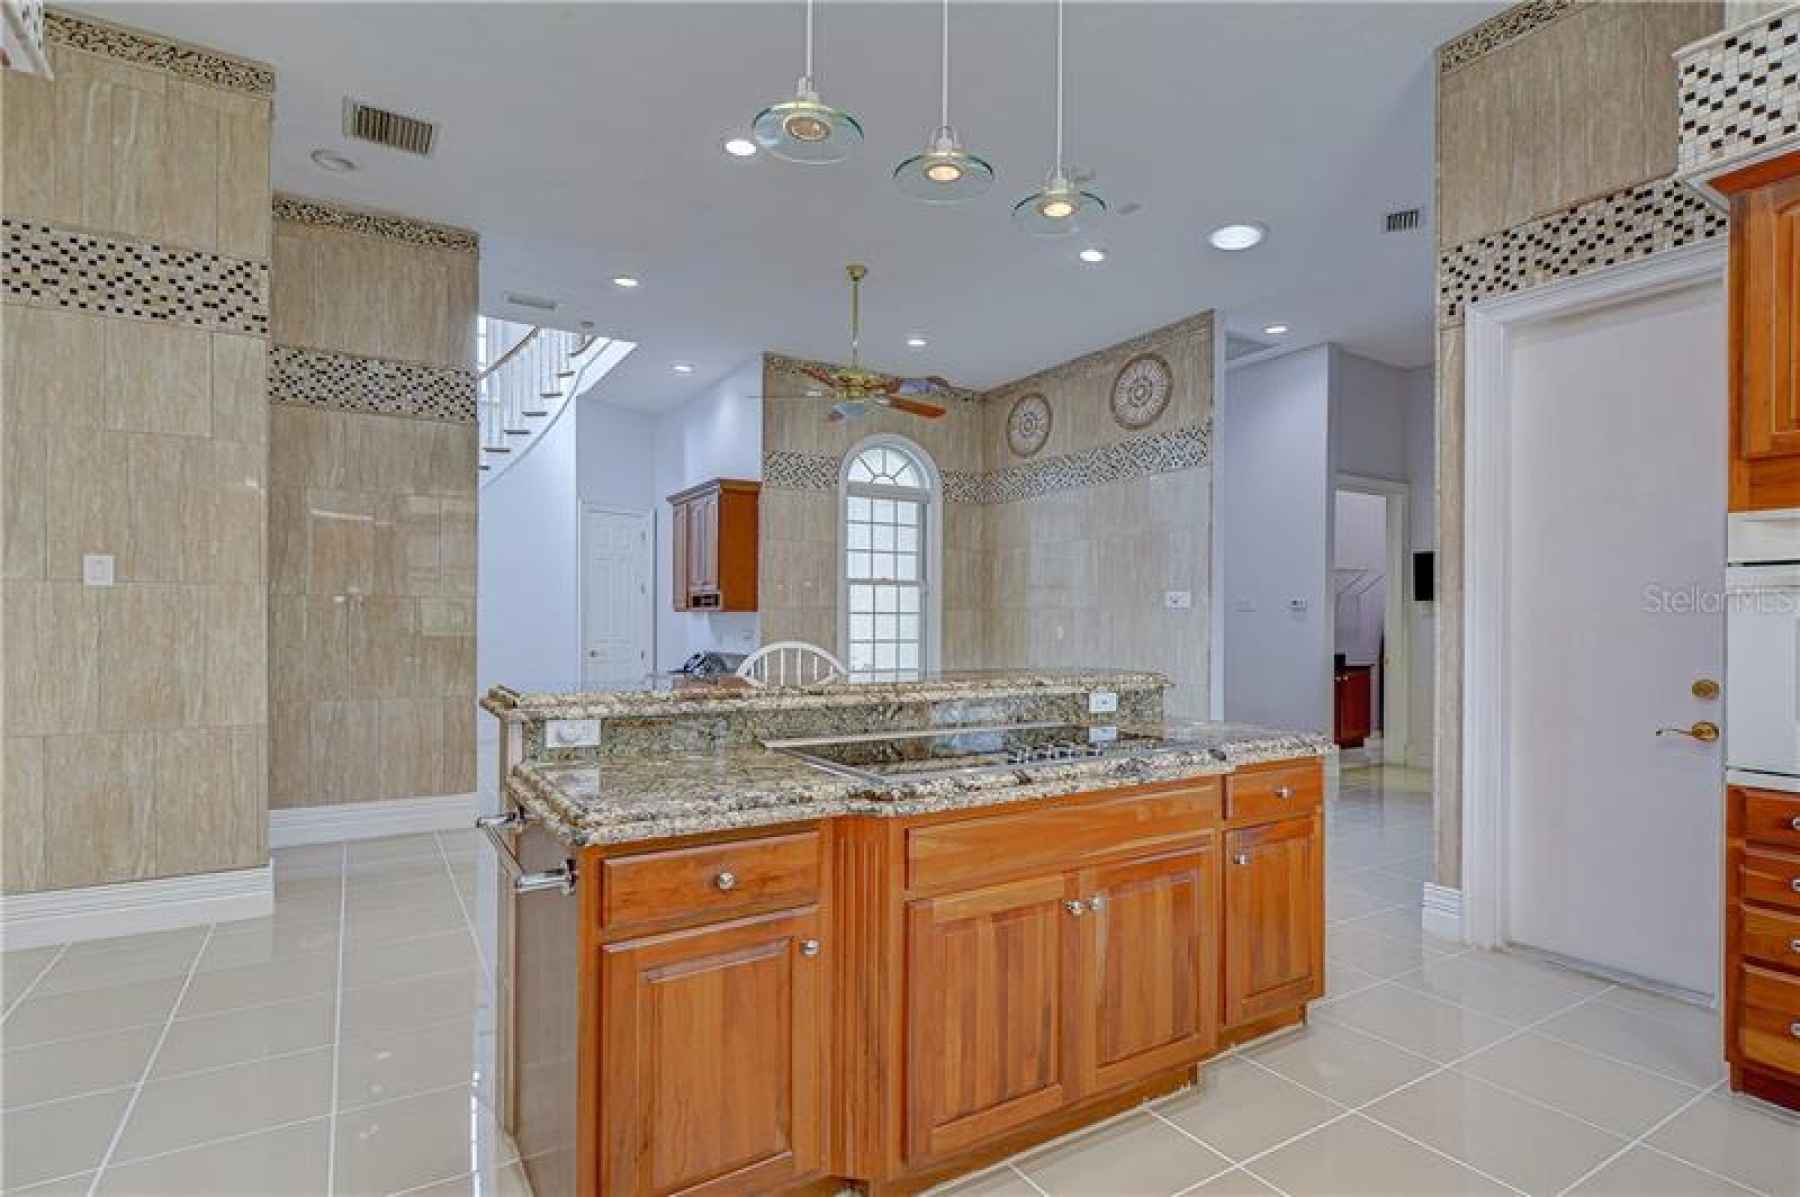 Kitchen features all the bells and whistles including Granite counters, built-in appliances, trash c